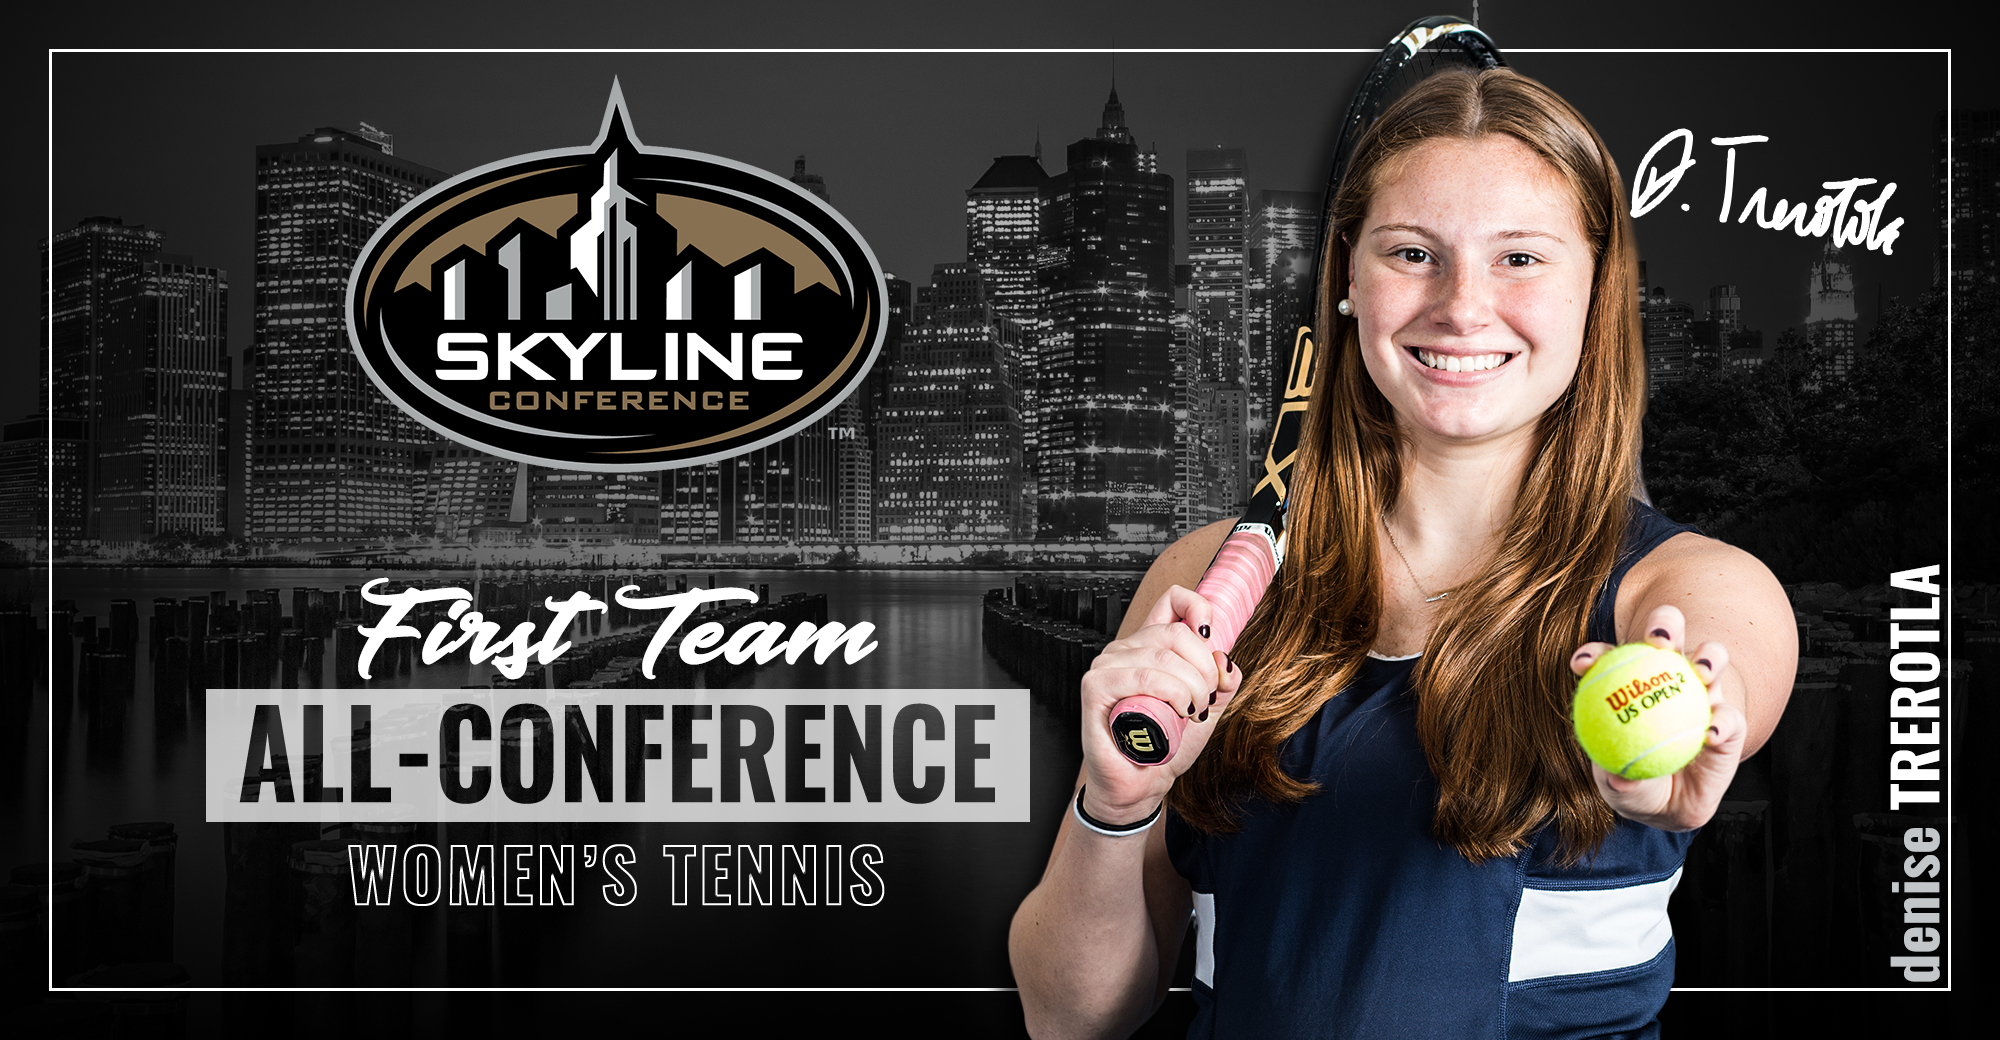 Trerotola Repeats as Skyline All-Conference First-Team Selection